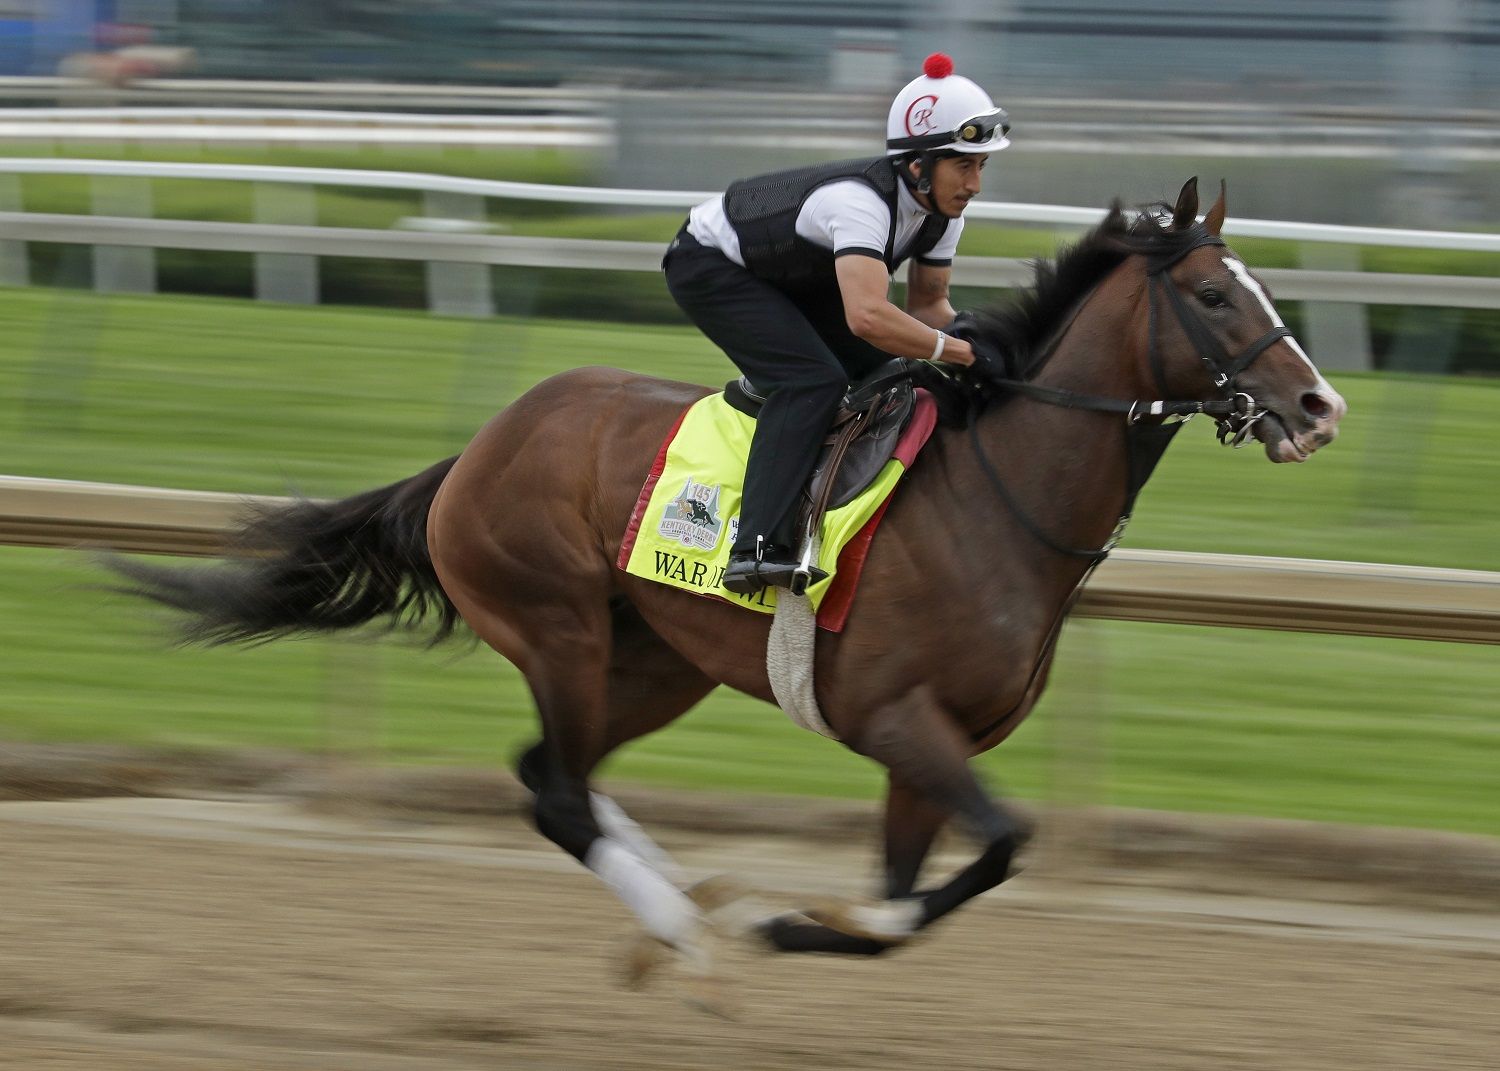 Kentucky Derby hopeful War of Will is ridden during a workout at Churchill Downs Tuesday, April 30, 2019, in Louisville, Ky. The 145th running of the Kentucky Derby is scheduled for Saturday, May 4. (AP Photo/Charlie Riedel)